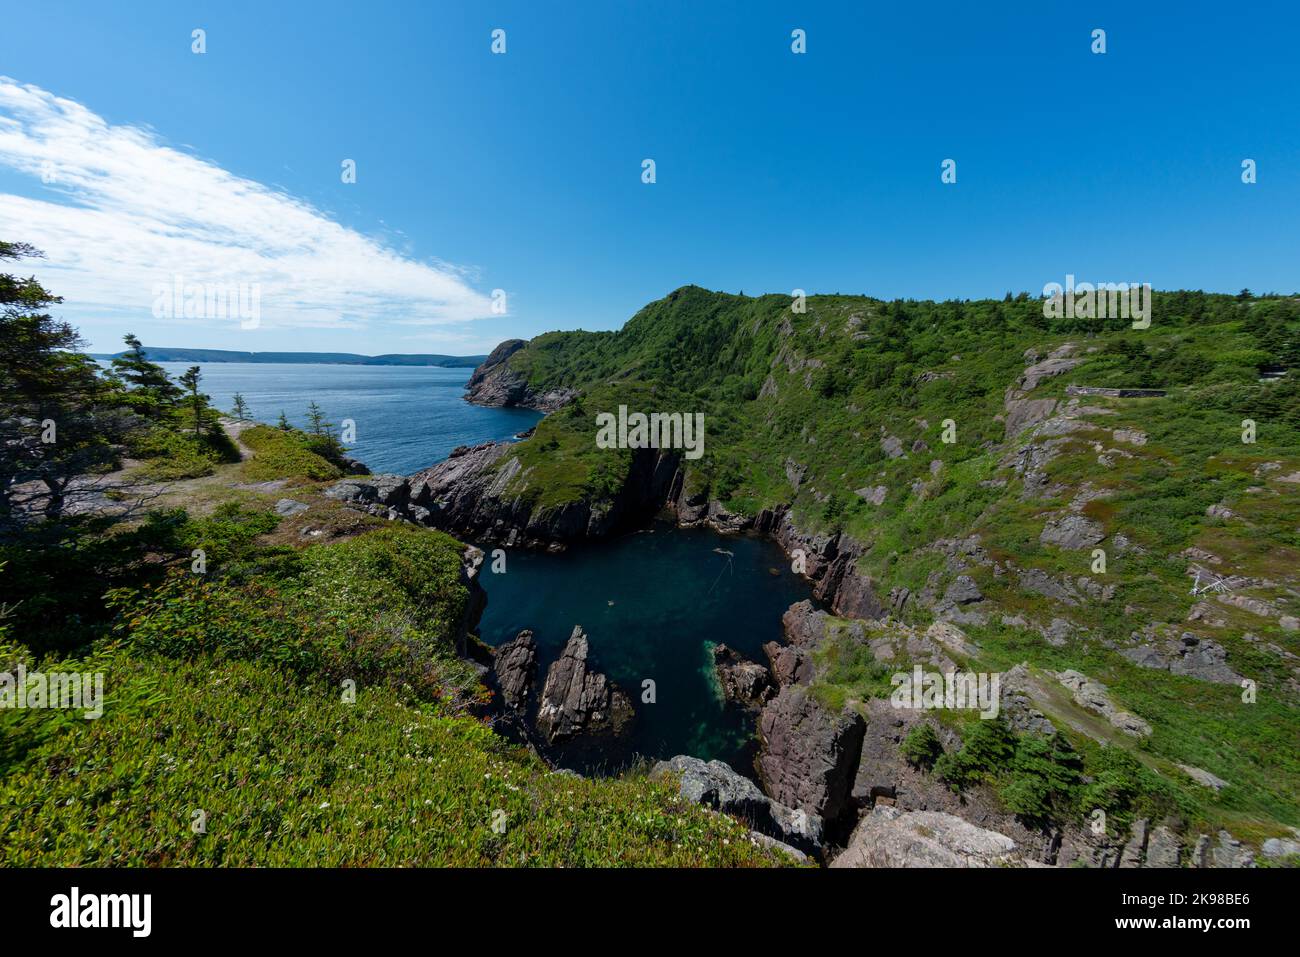 A rugged ocean coastline with high rocky sea stacks, cliffs, vibrant green grass, blue sky, and clouds. The smooth water is a blue color. Stock Photo